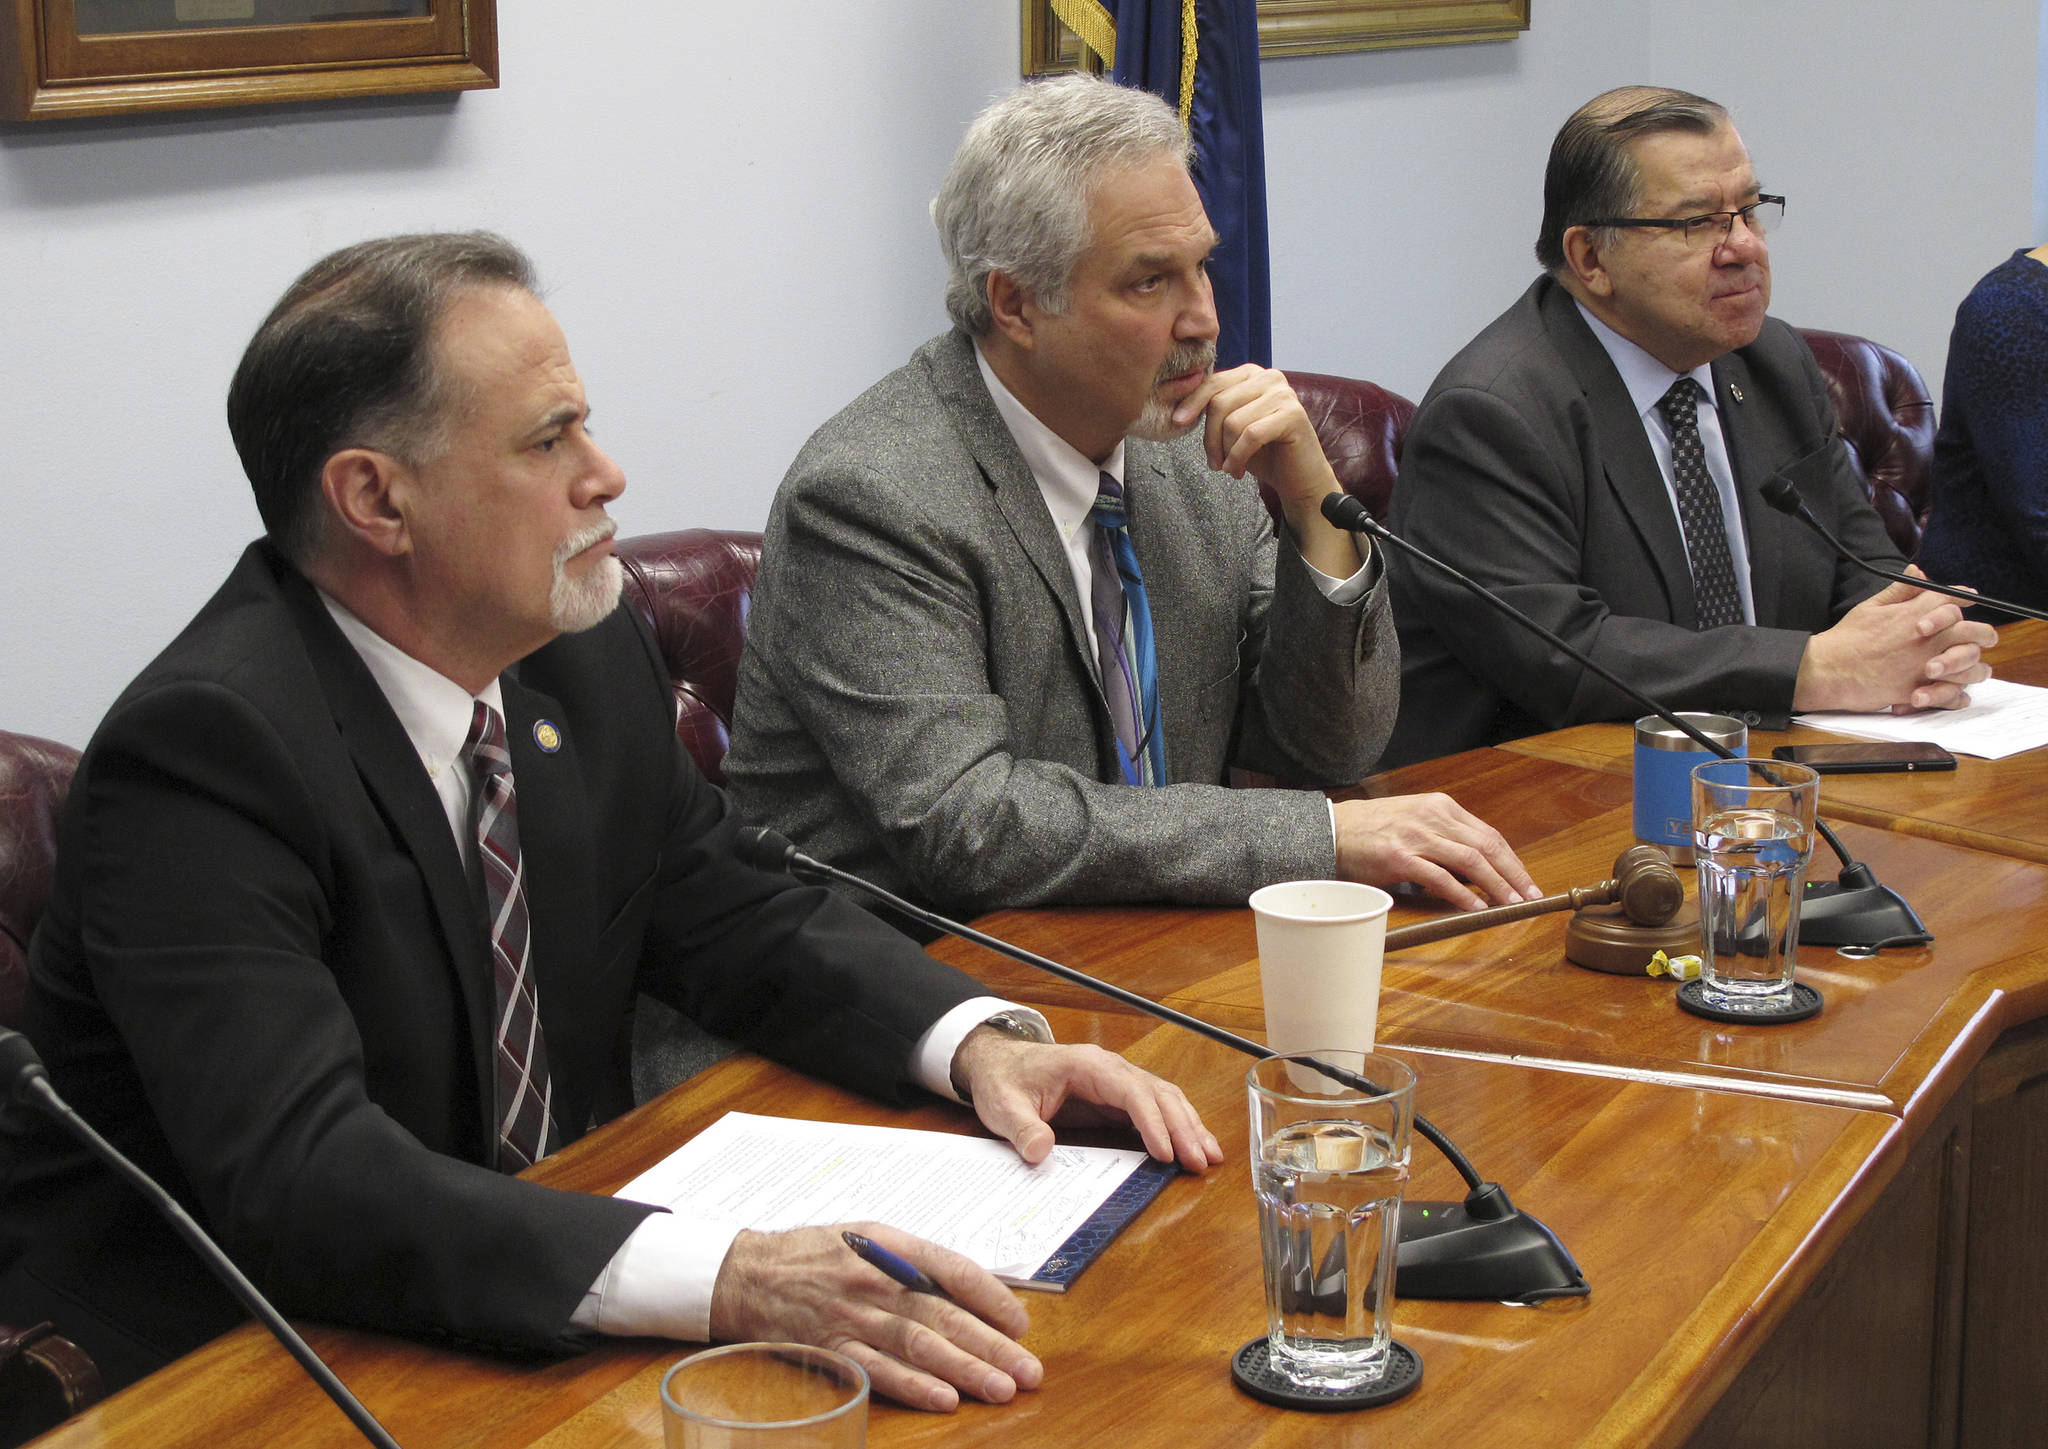 Three members of the Alaska Senate majority’s leadership listen to questions during the majority’s weekly news conference on Monday in Juneau. Pictured are, from left, Senate Majority Leader Peter Micciche, Senate President Pete Kelly and Senate Finance Committee Co-chair Lyman Hoffman. (AP Photo/Becky Bohrer)